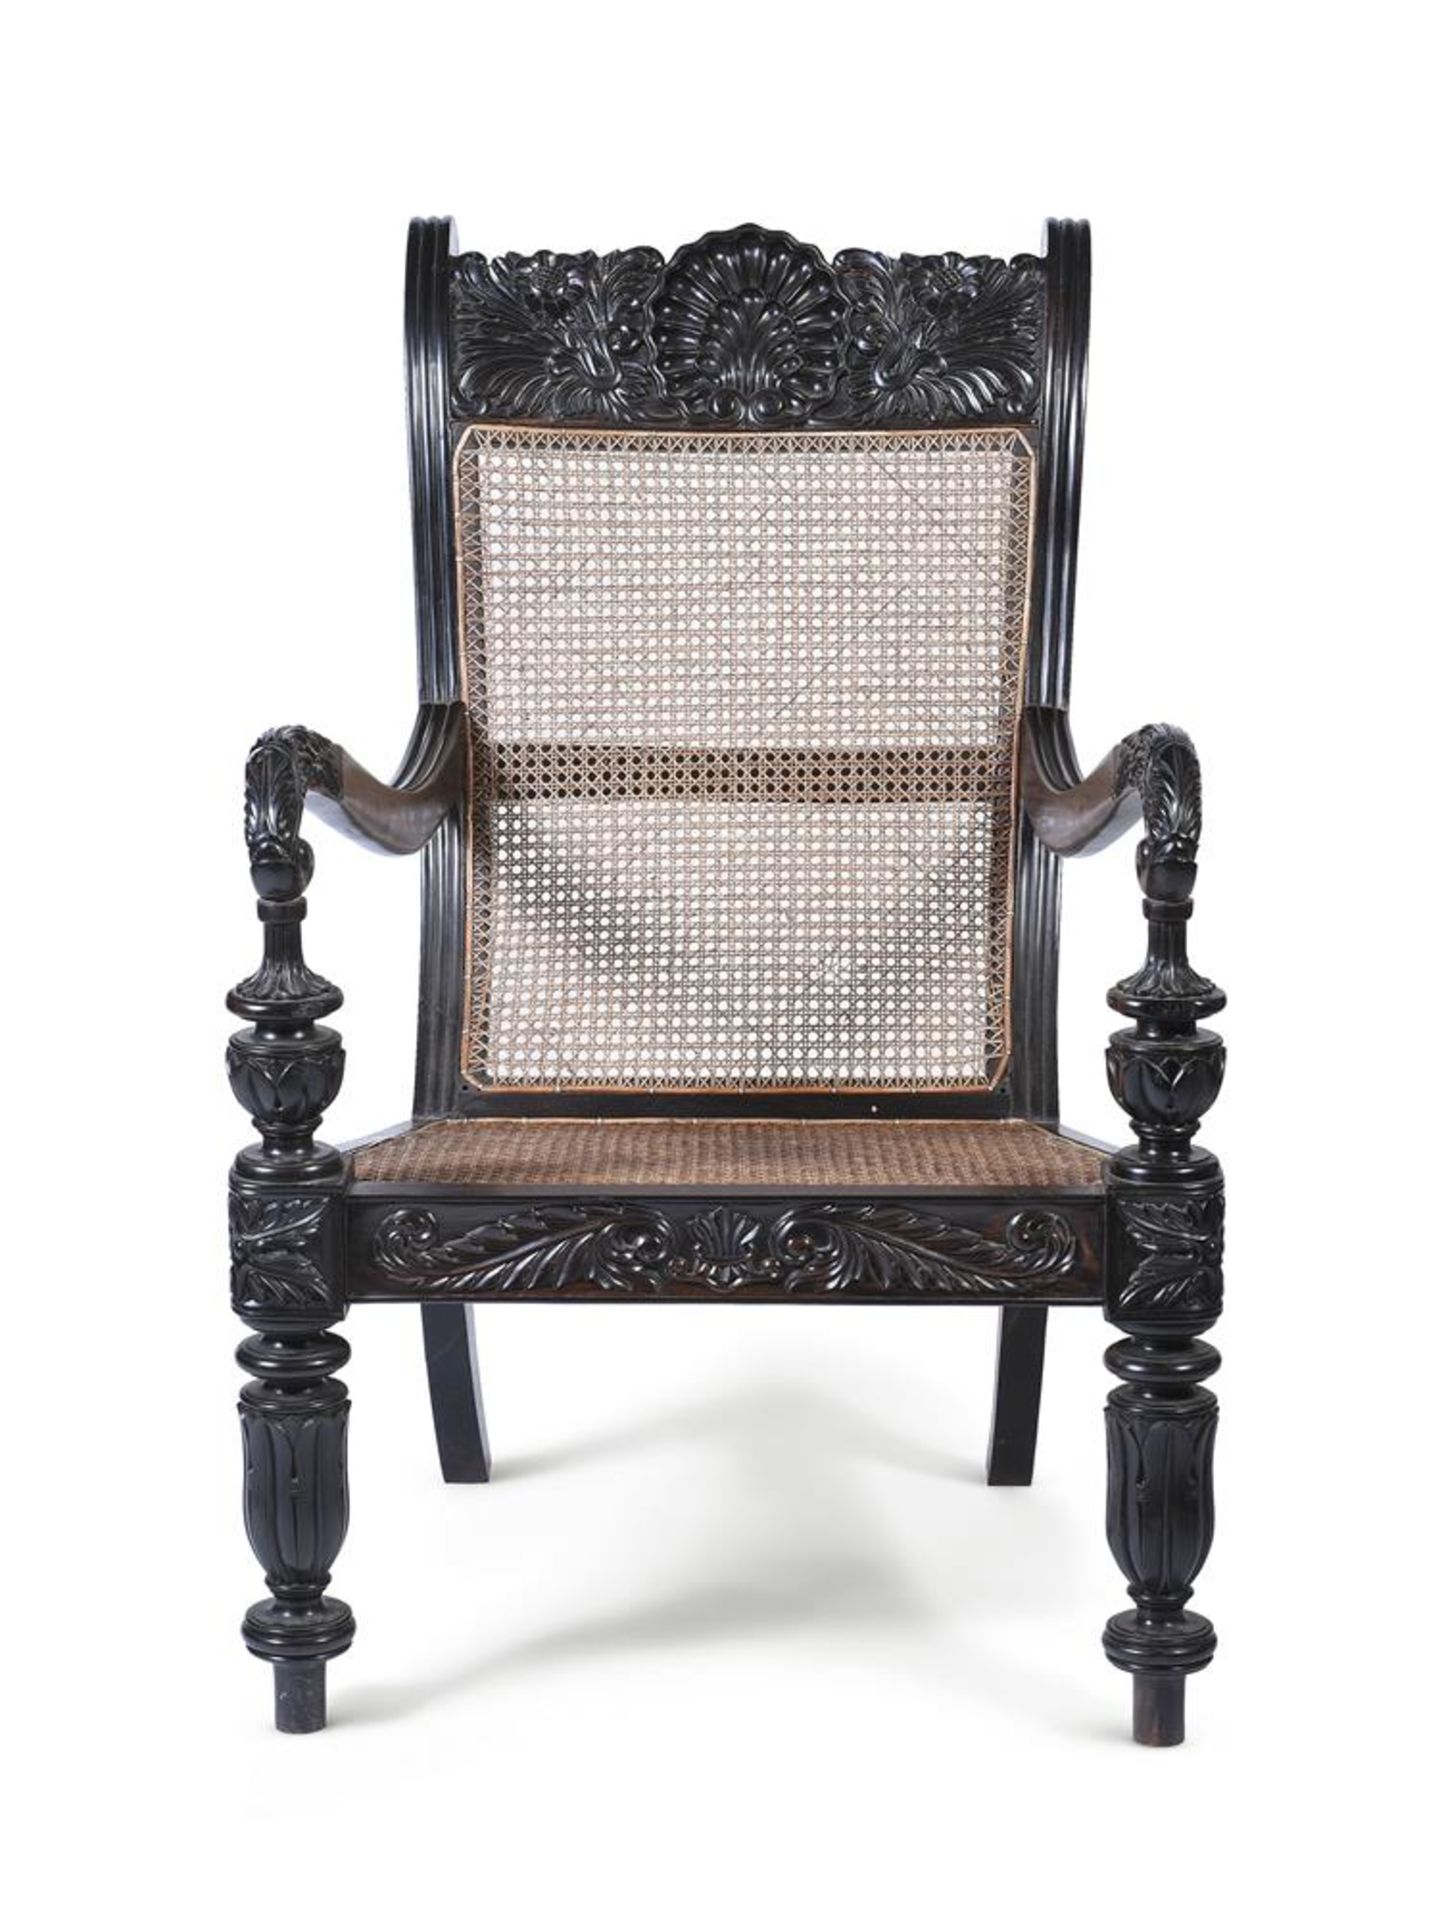 Y A CEYLONESE CARVED EBONY ARMCHAIR, PROBABLY GALLE DISTRICT, FIRST HALF 19TH CENTURY - Image 3 of 5